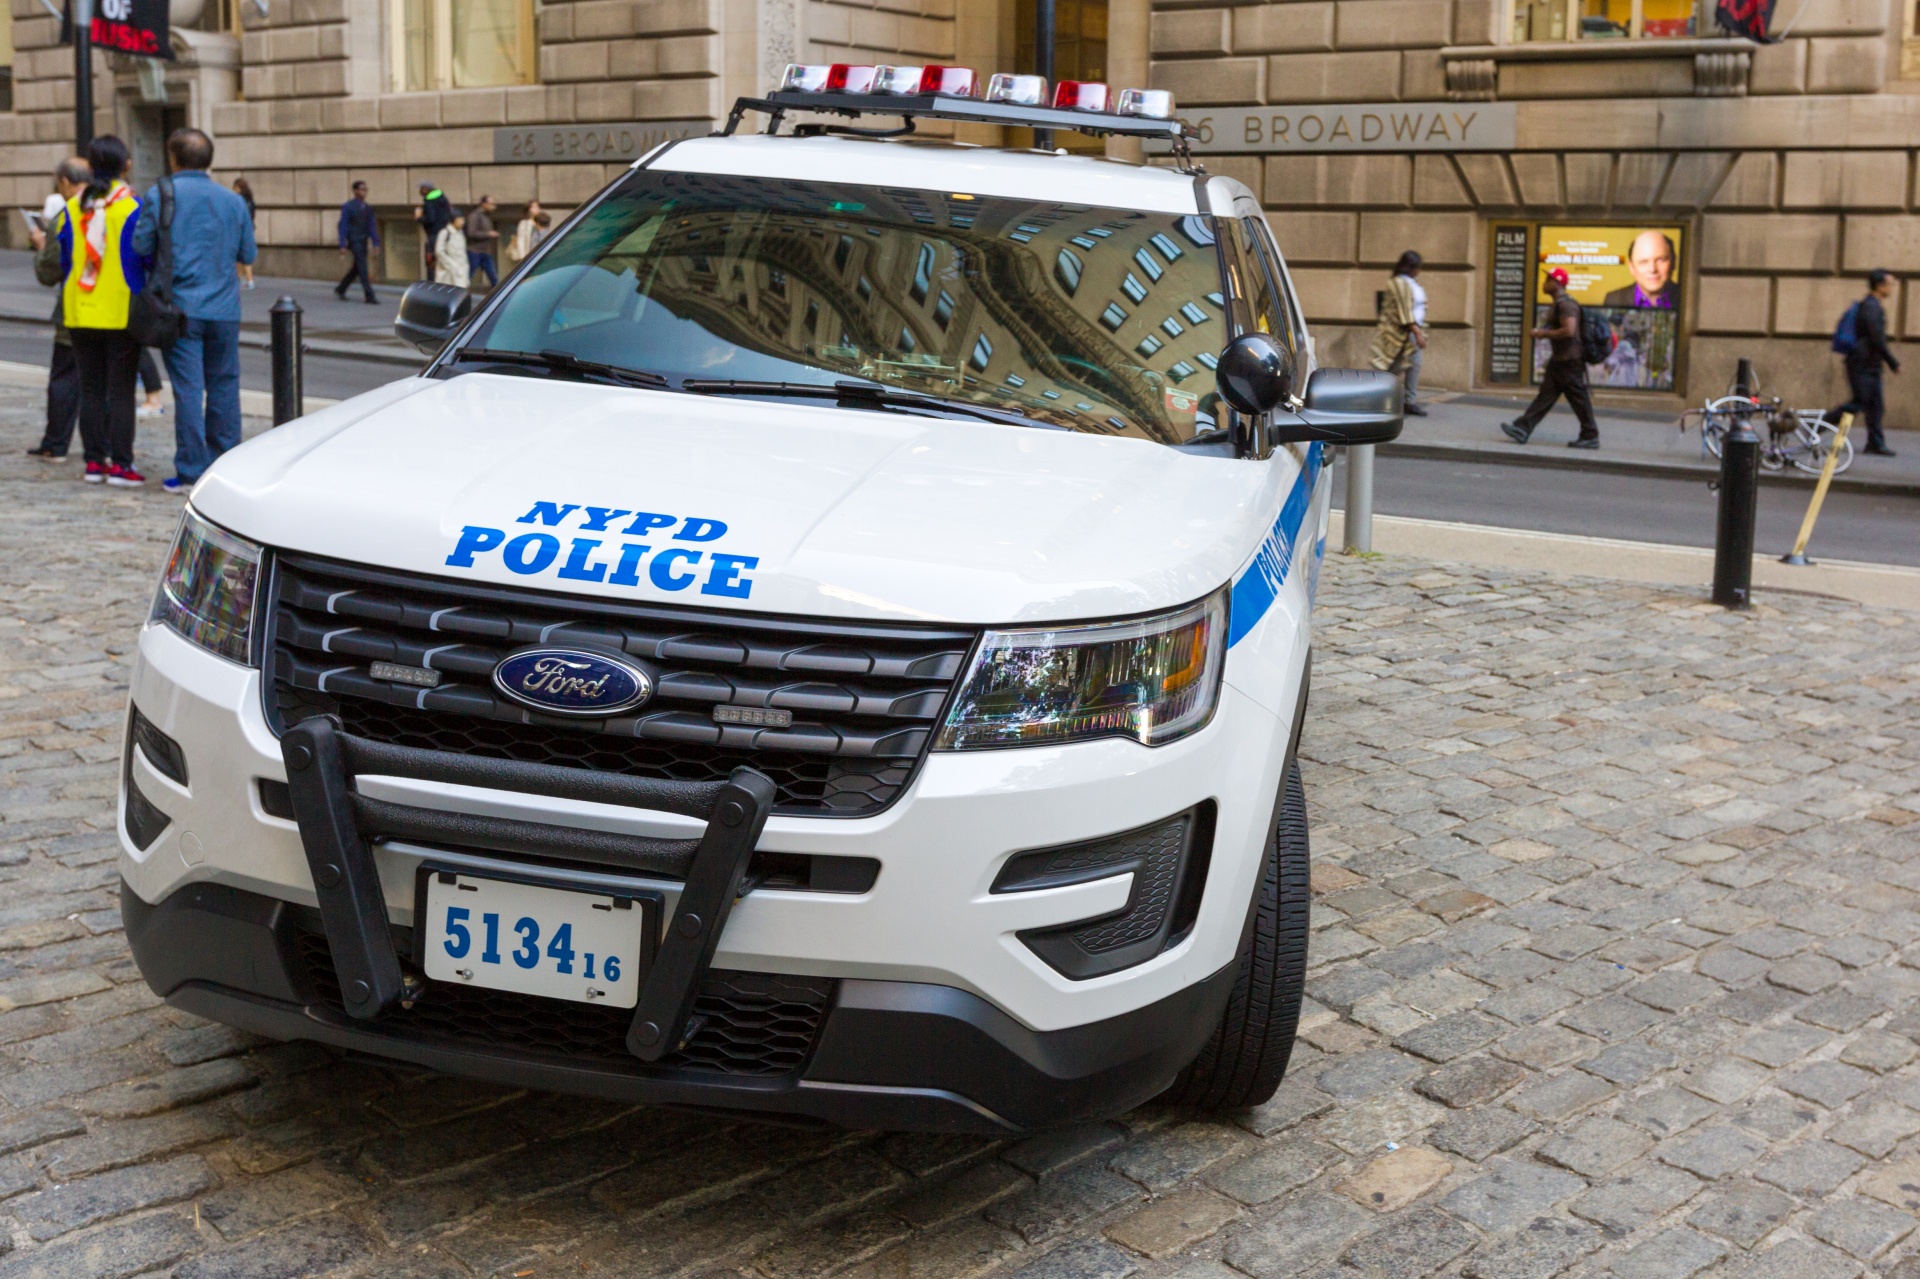 NYPD Police Car